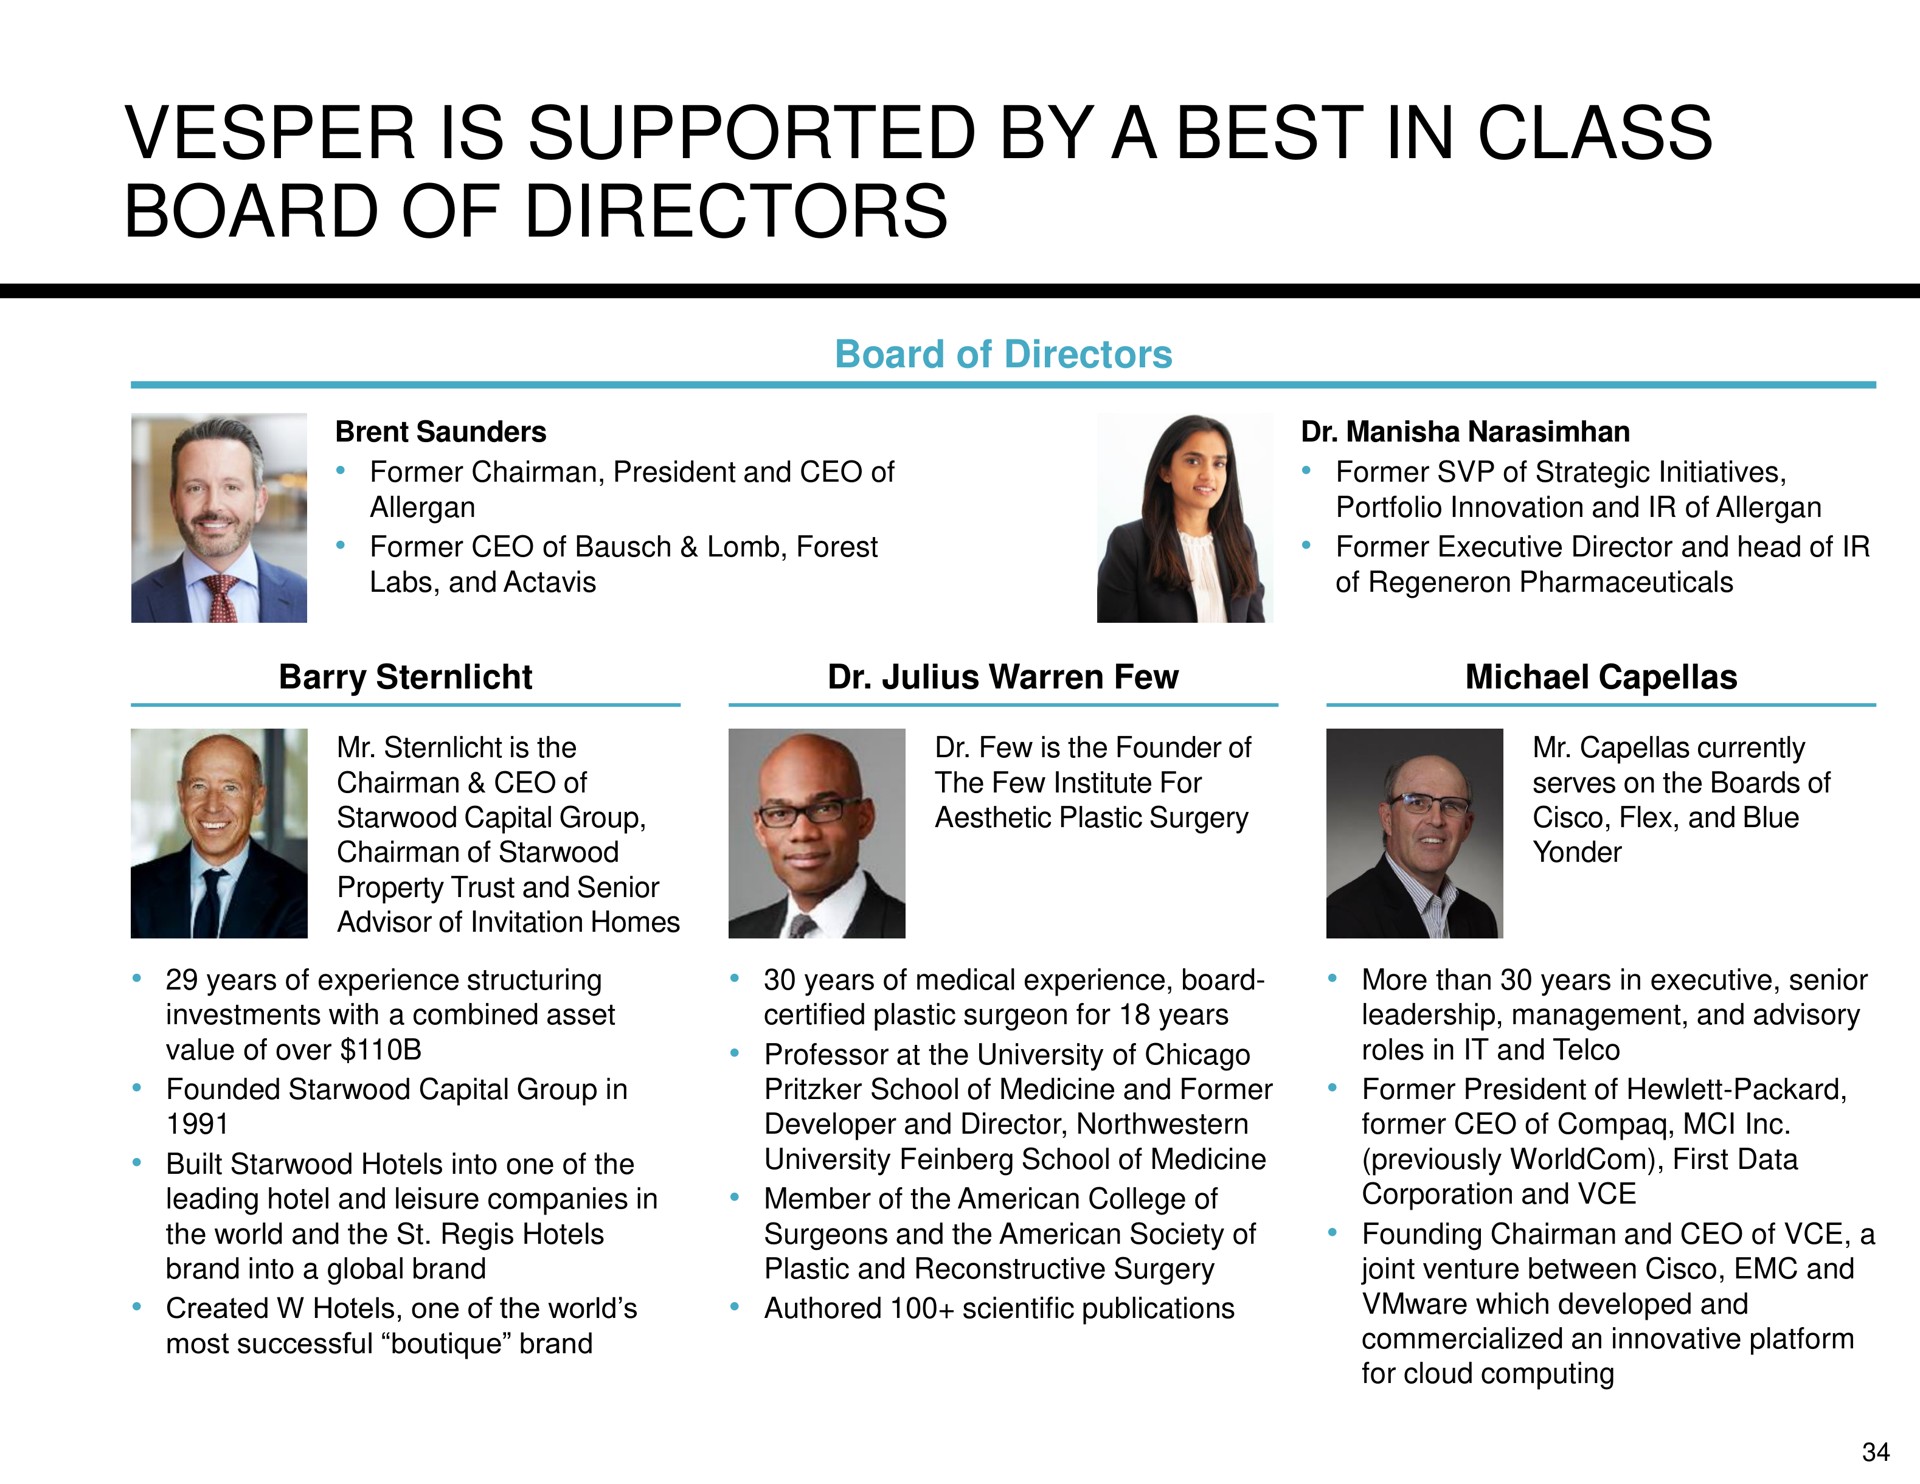 vesper is supported by a best in class board of directors | Hydrafacial